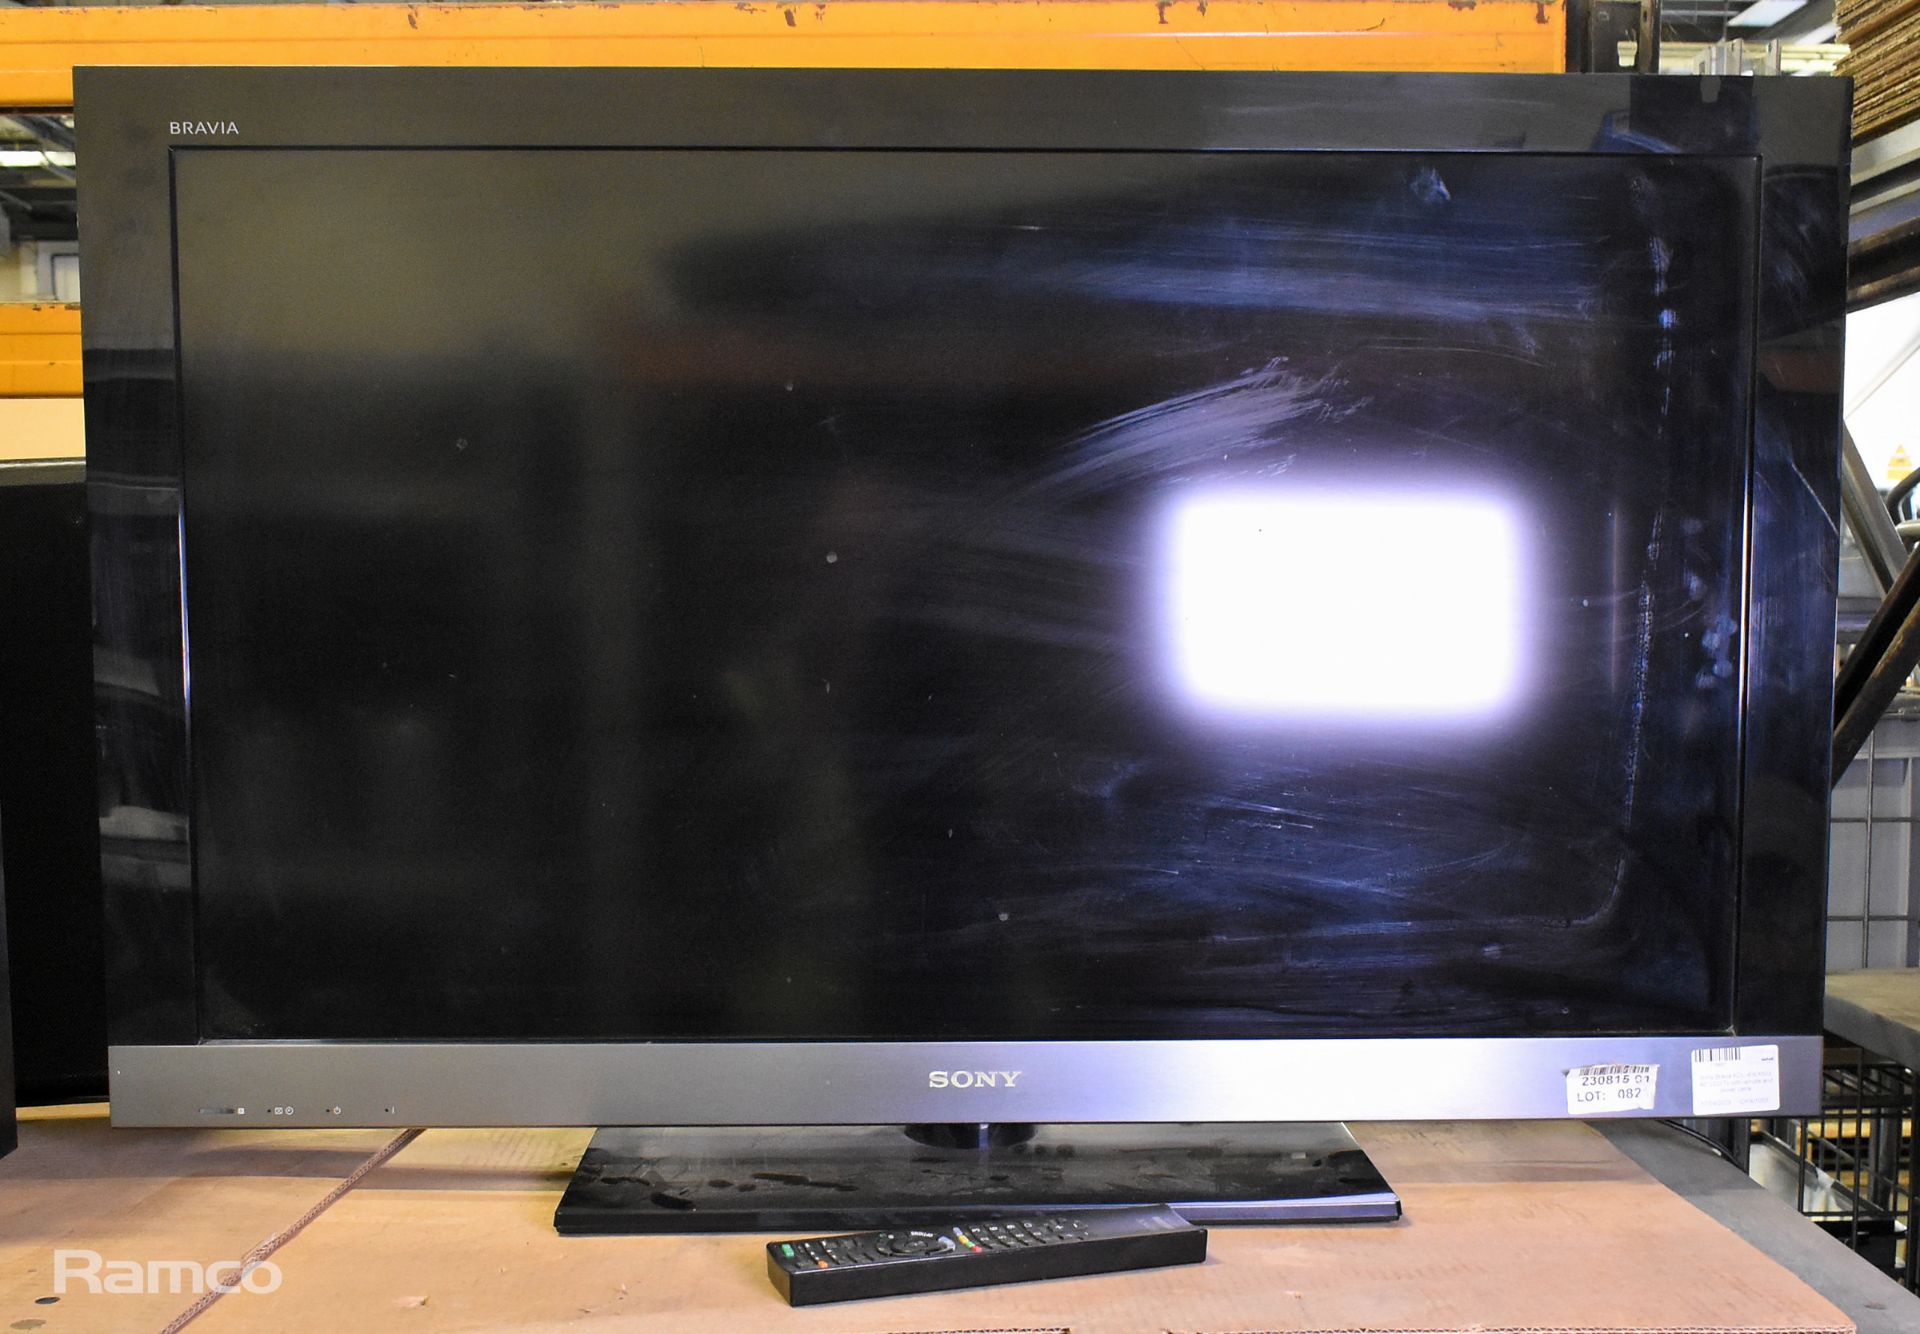 Sony Bravia KDL-40EX503 40 inch LCD TV with remote and power cable